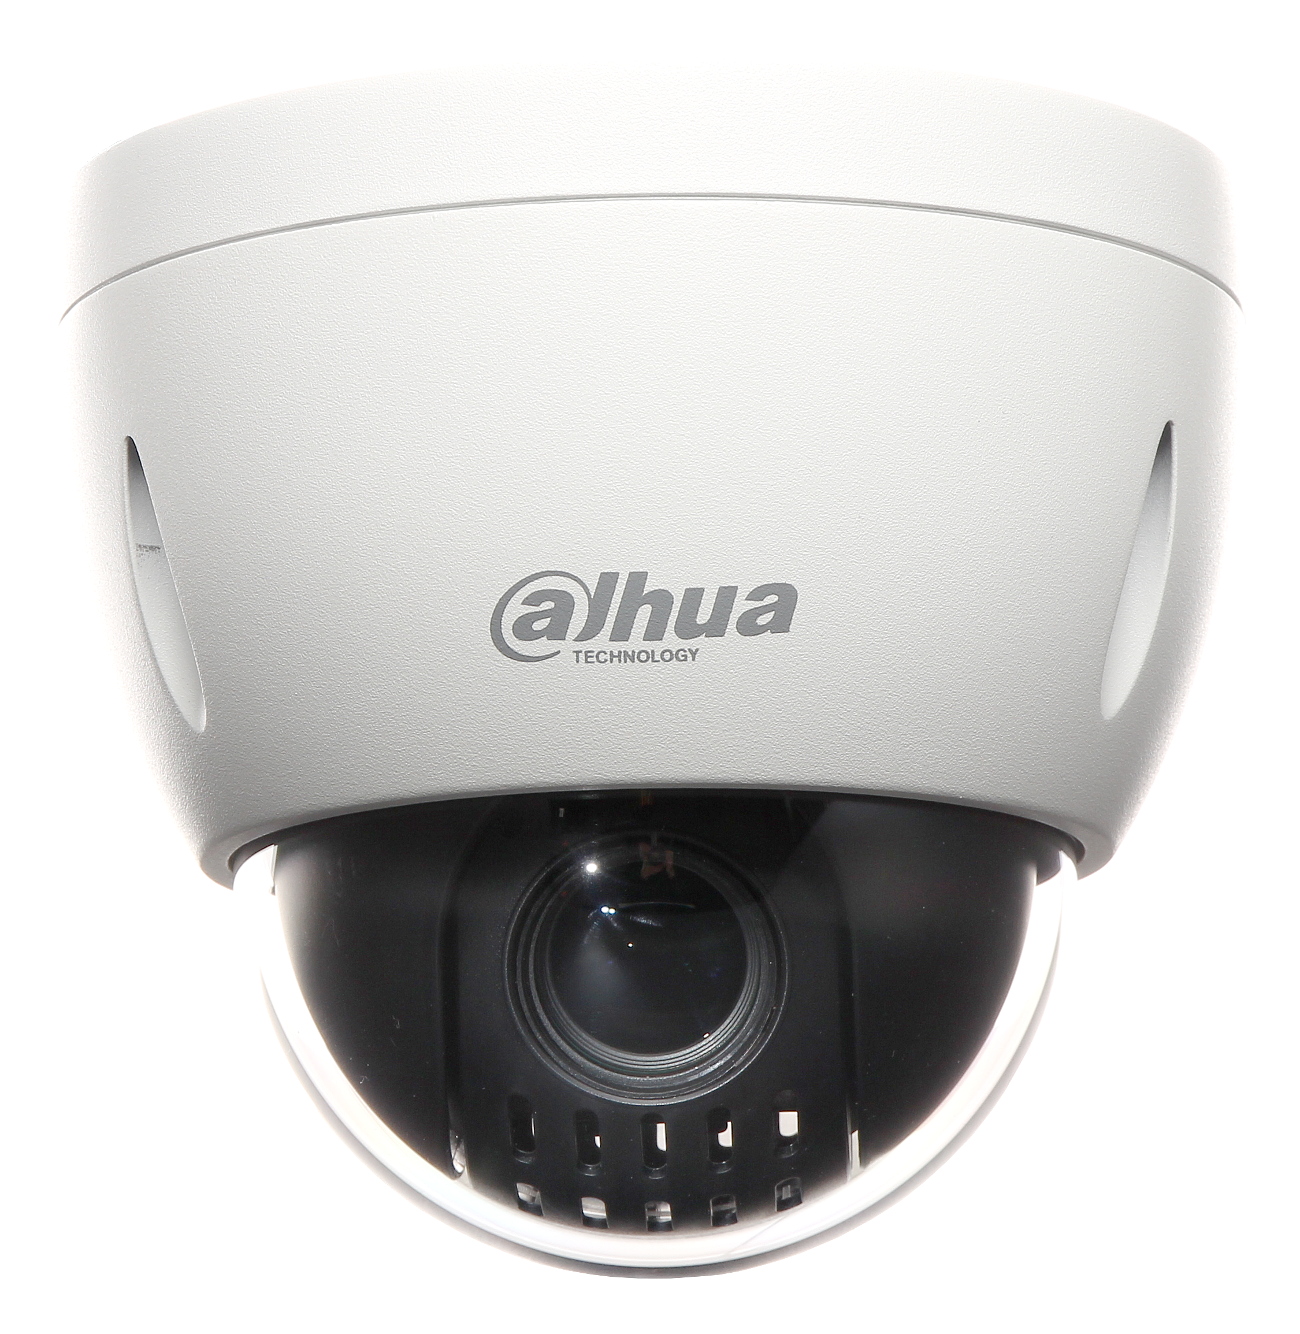 Dahua SD42212T-HN 2MP 12x Optical Zoom PTZ Network Dome Camera Support POE IP66 